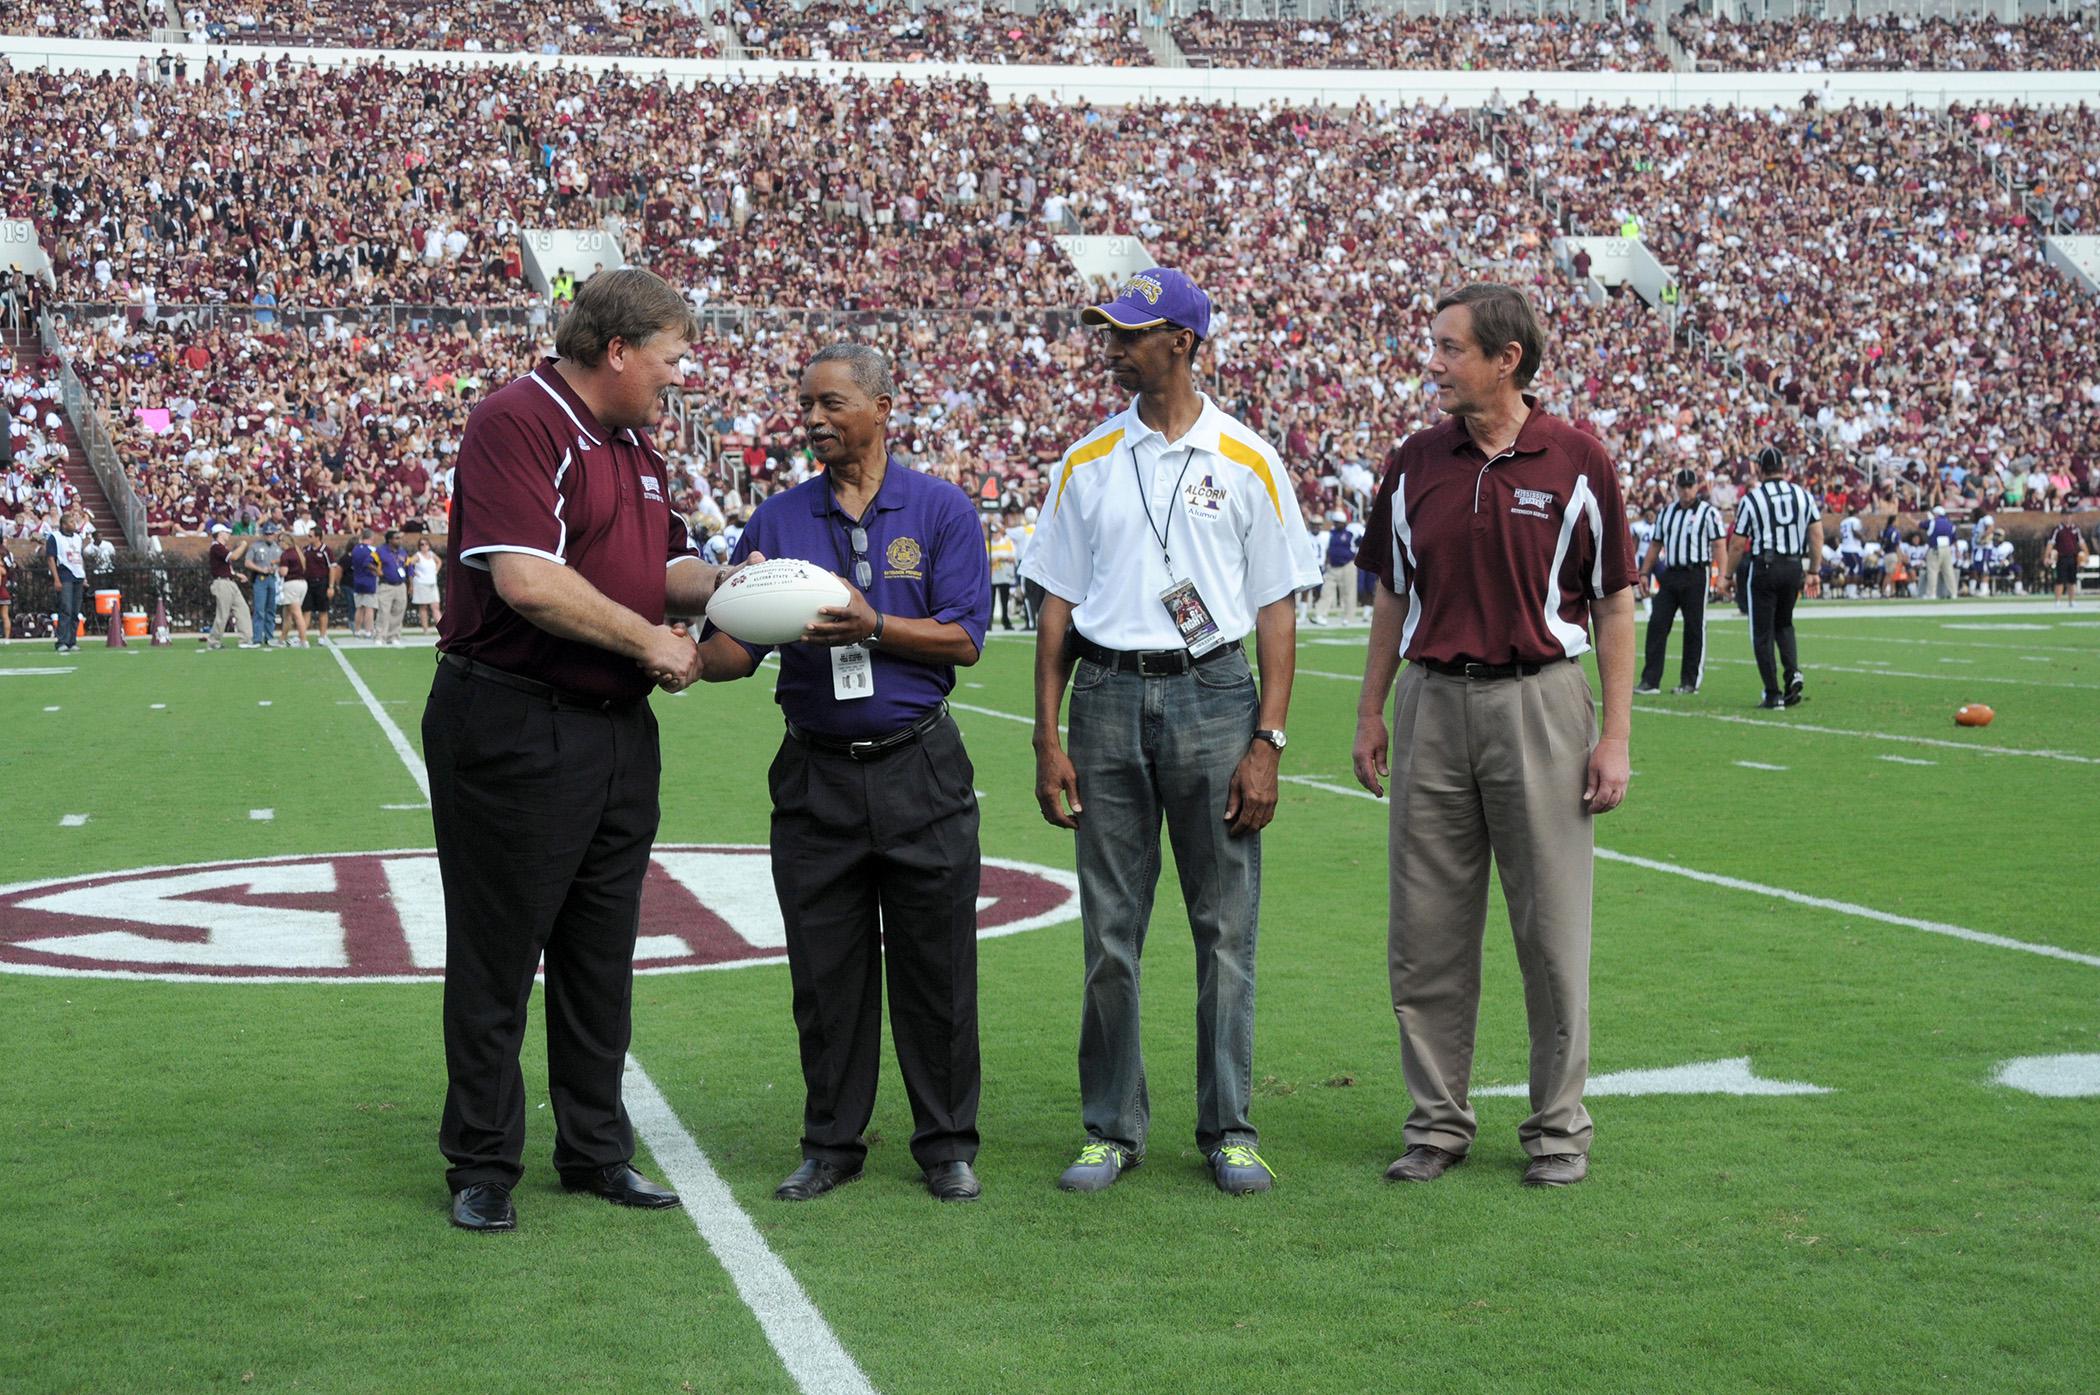 Mississippi State University Extension director Gary Jackson took to the field Sept. 7, 2013, at the MSU home opener to present a commemorative football to visiting Alcorn State University partners. From left are Jackson; Alcorn Extension administrators Dalton McAfee and Anthony Reed; and Gregory Bohach, MSU vice president for the Division of Agriculture, Forestry and Veterinary Medicine. (Photo by MSU Ag Communications/Kat Lawrence)